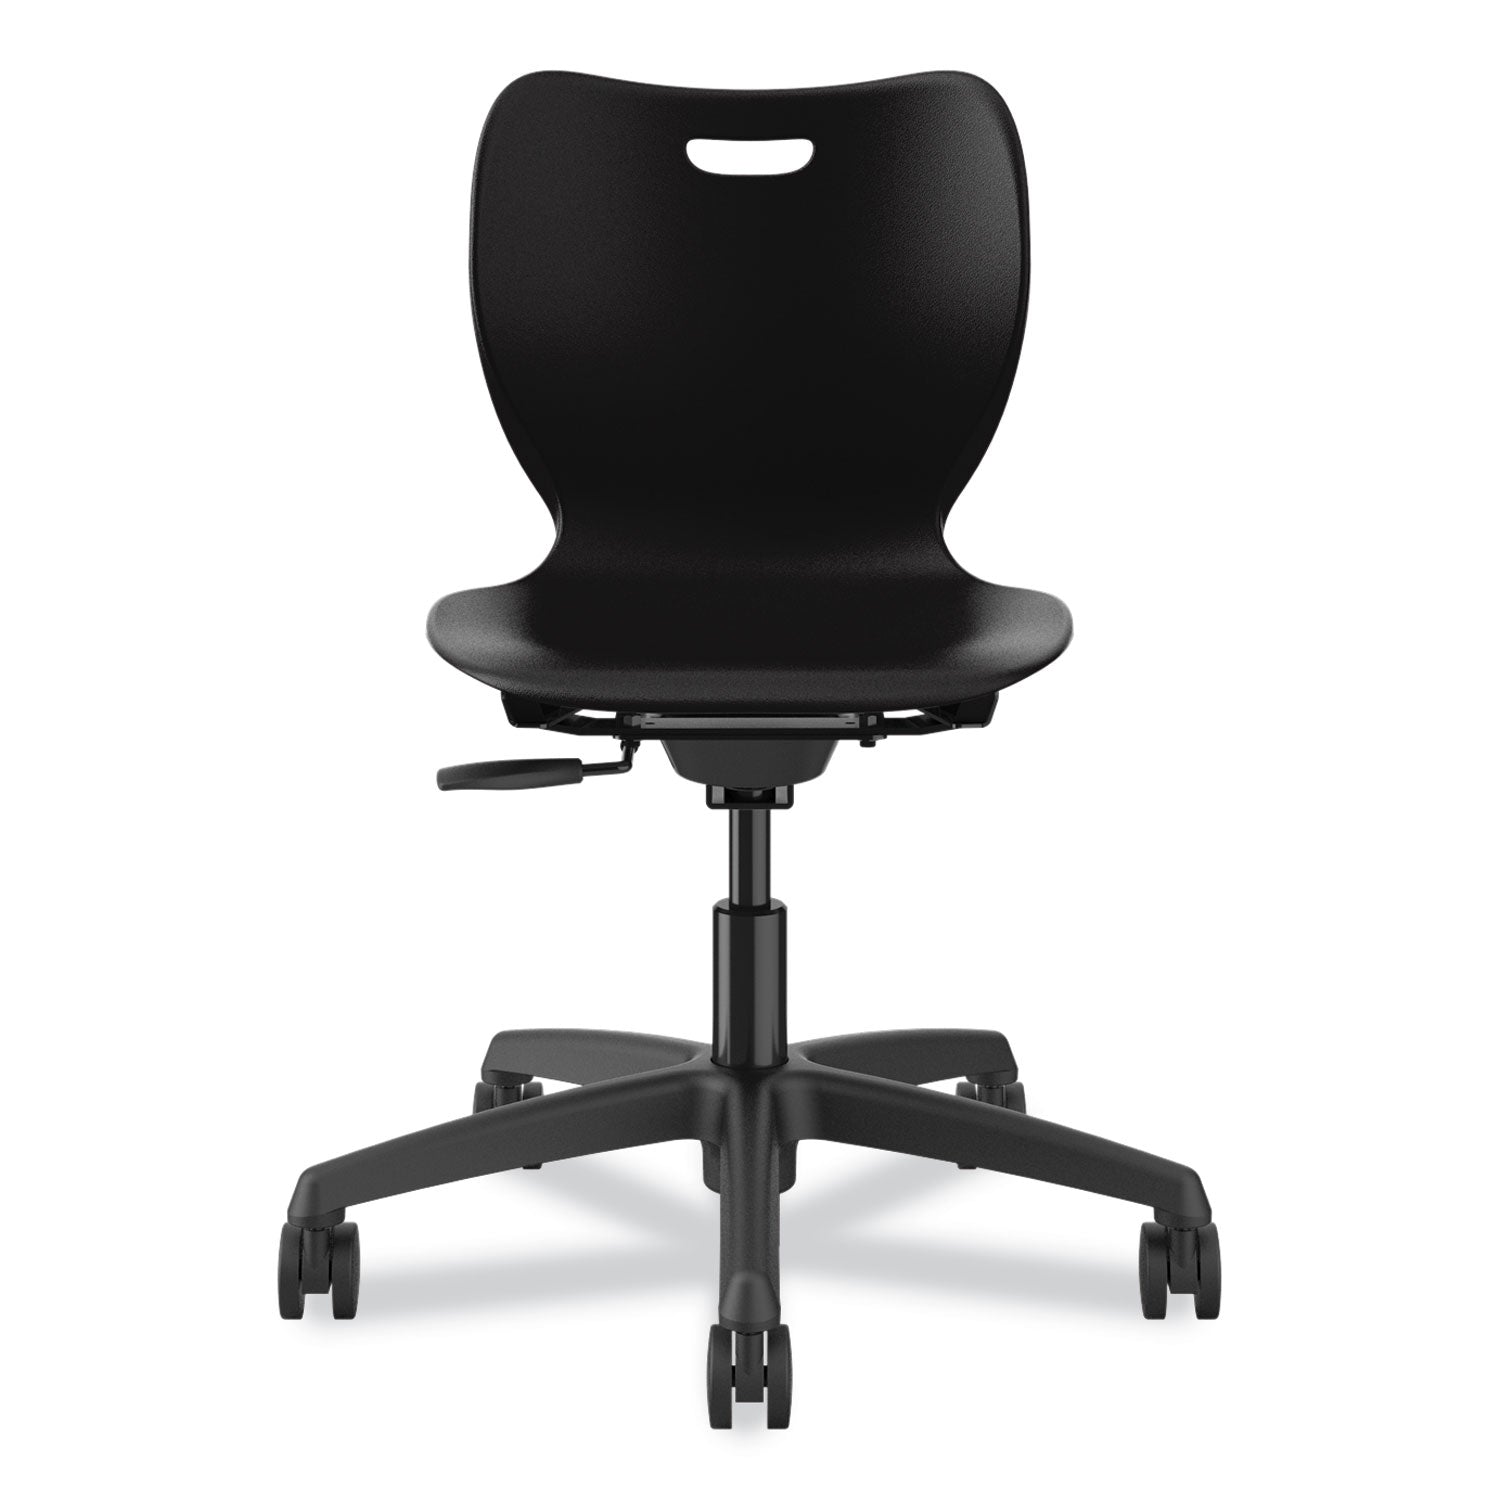 smartlink-task-chair-supports-up-to-275-lb-3475-seat-height-onyx-seat-back-black-base-ships-in-7-10-business-days_honsstk18bhlon - 4